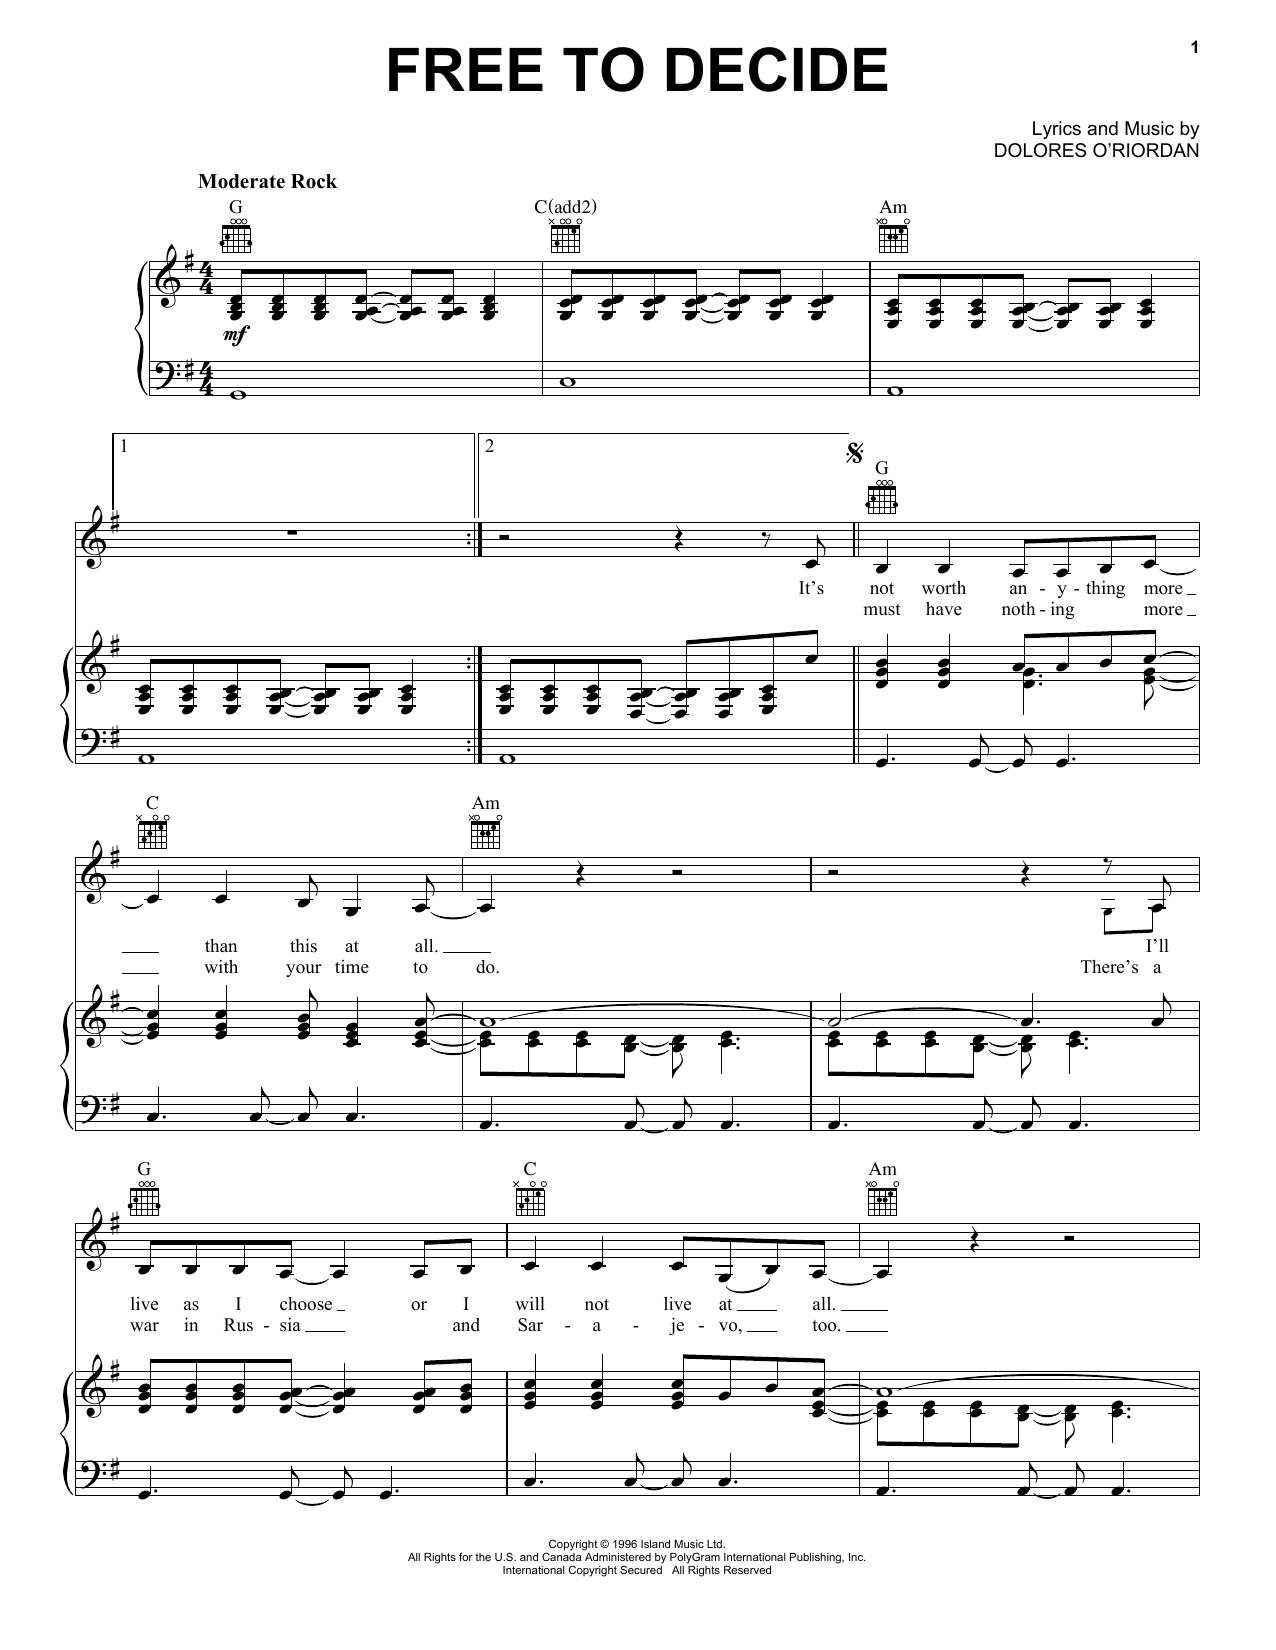 Download The Cranberries Free To Decide Sheet Music